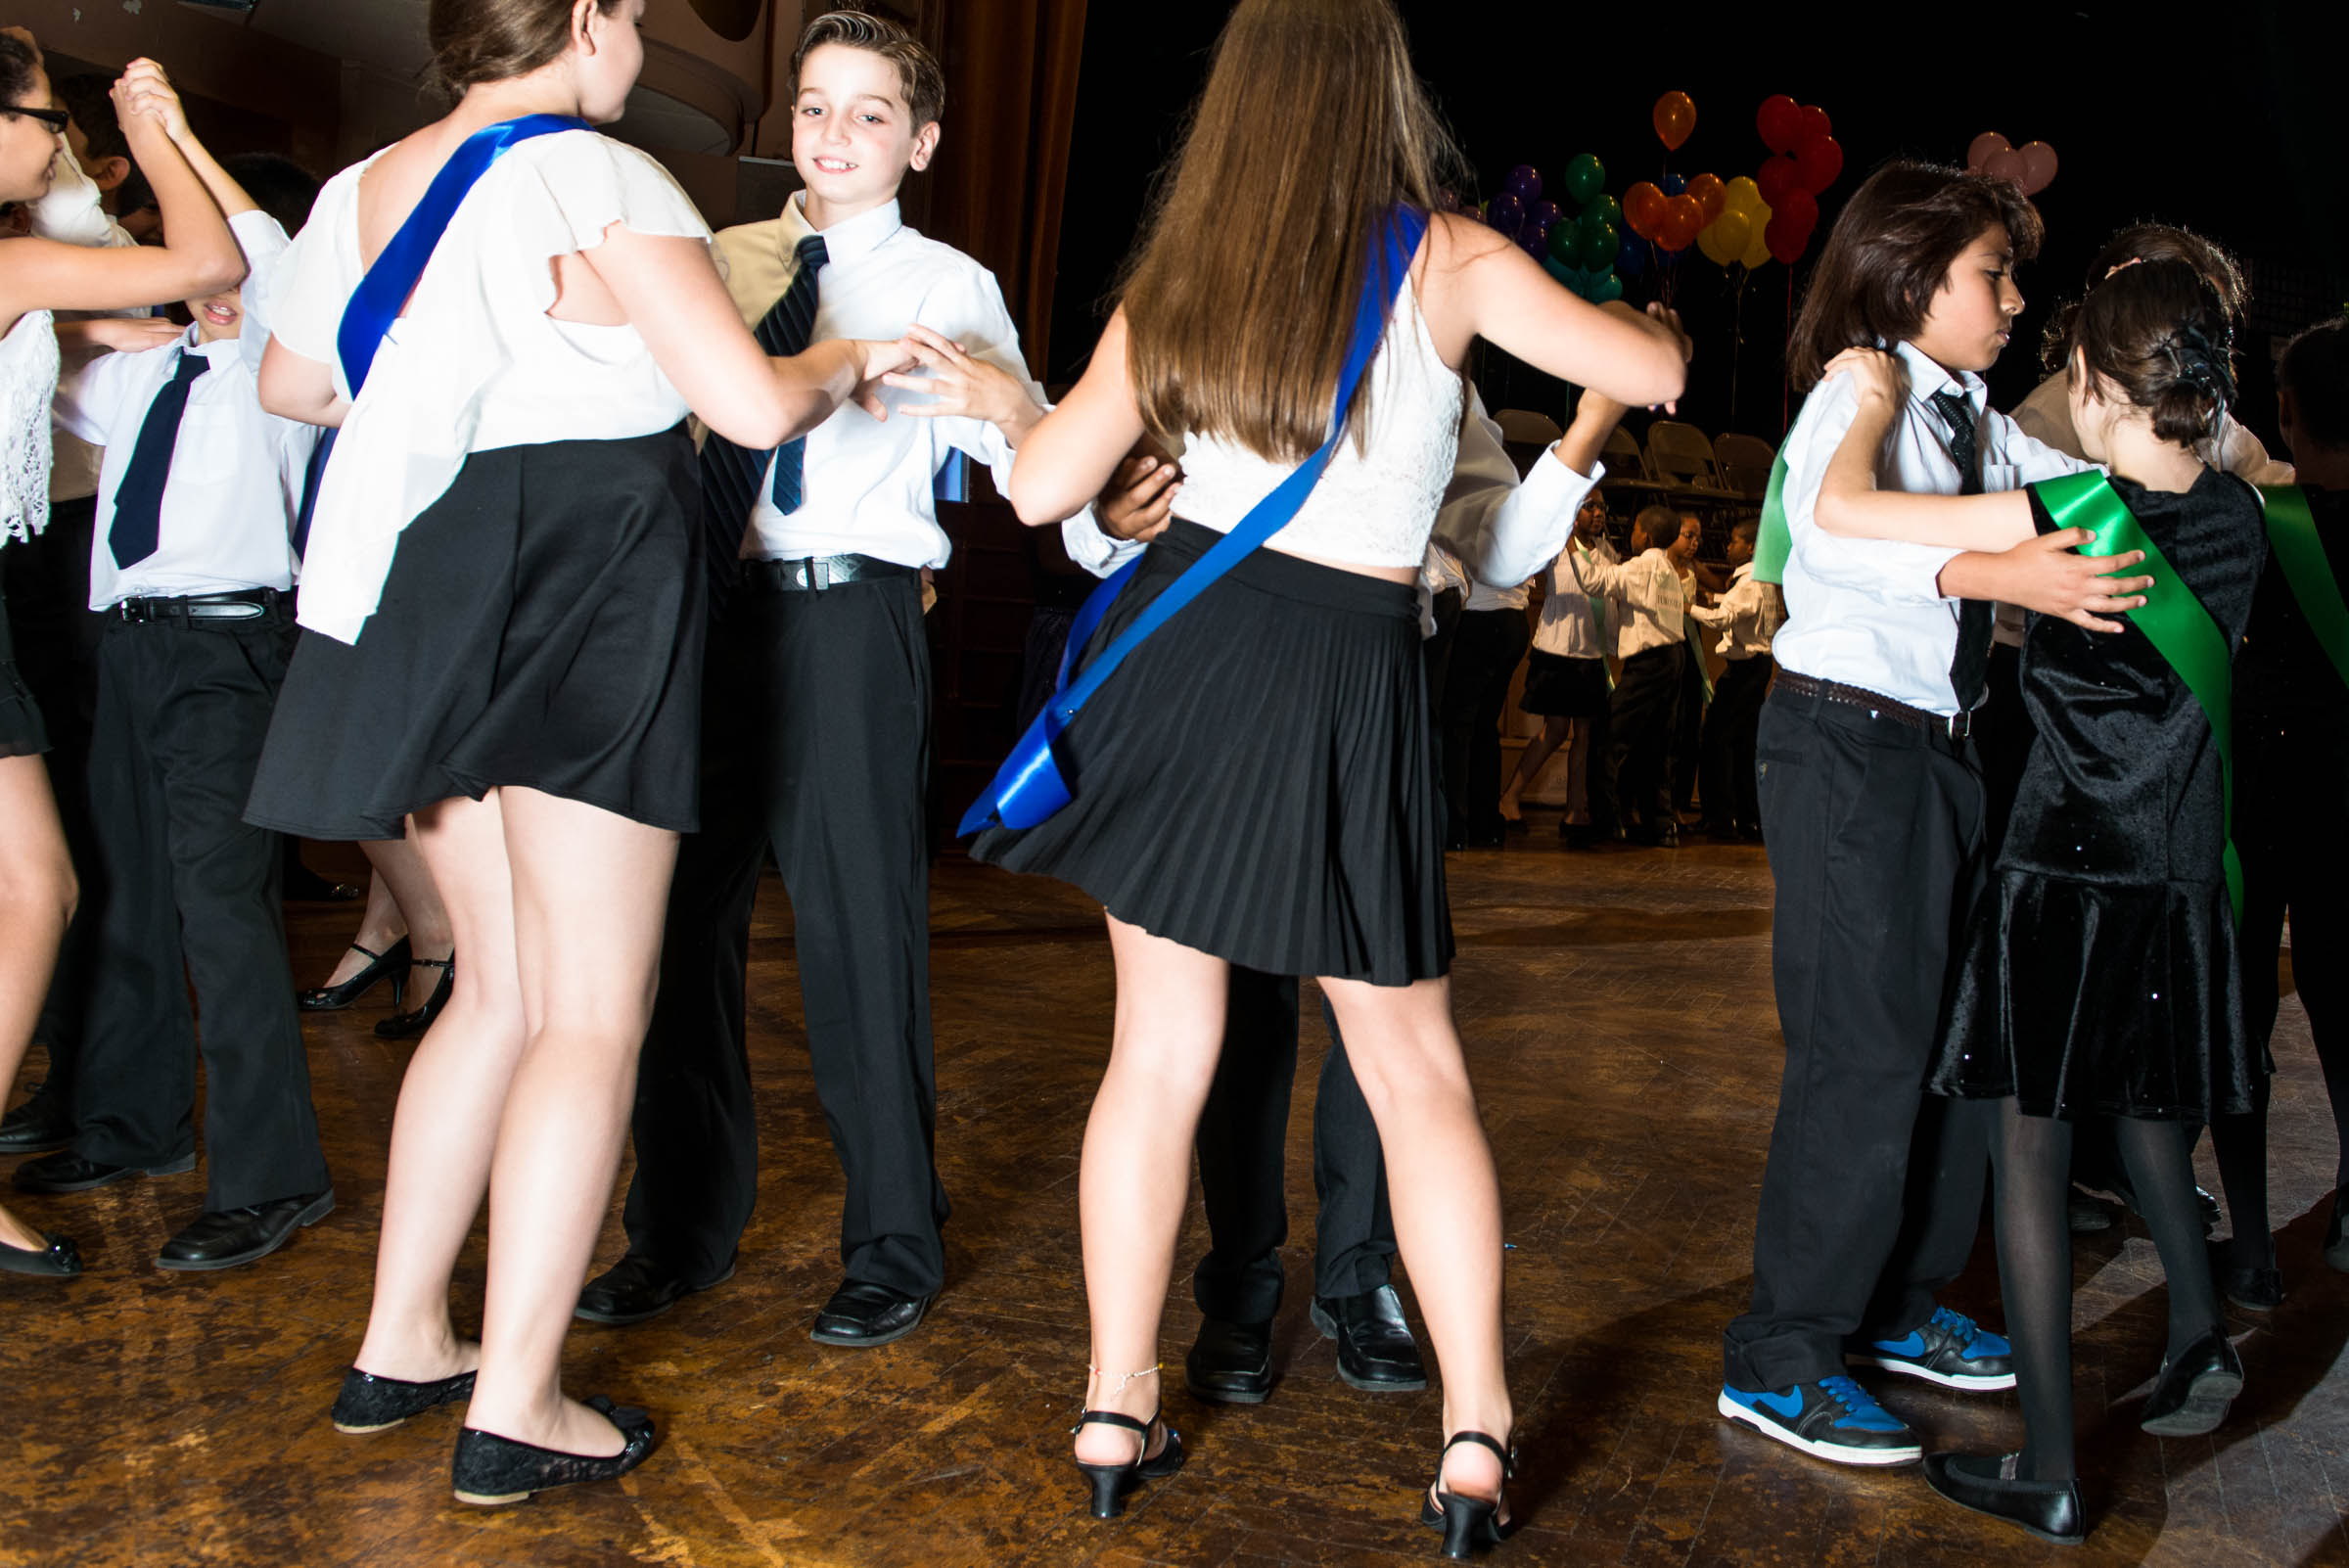 Elementary school students compete at Philadelphia Ballroom Dance Competition